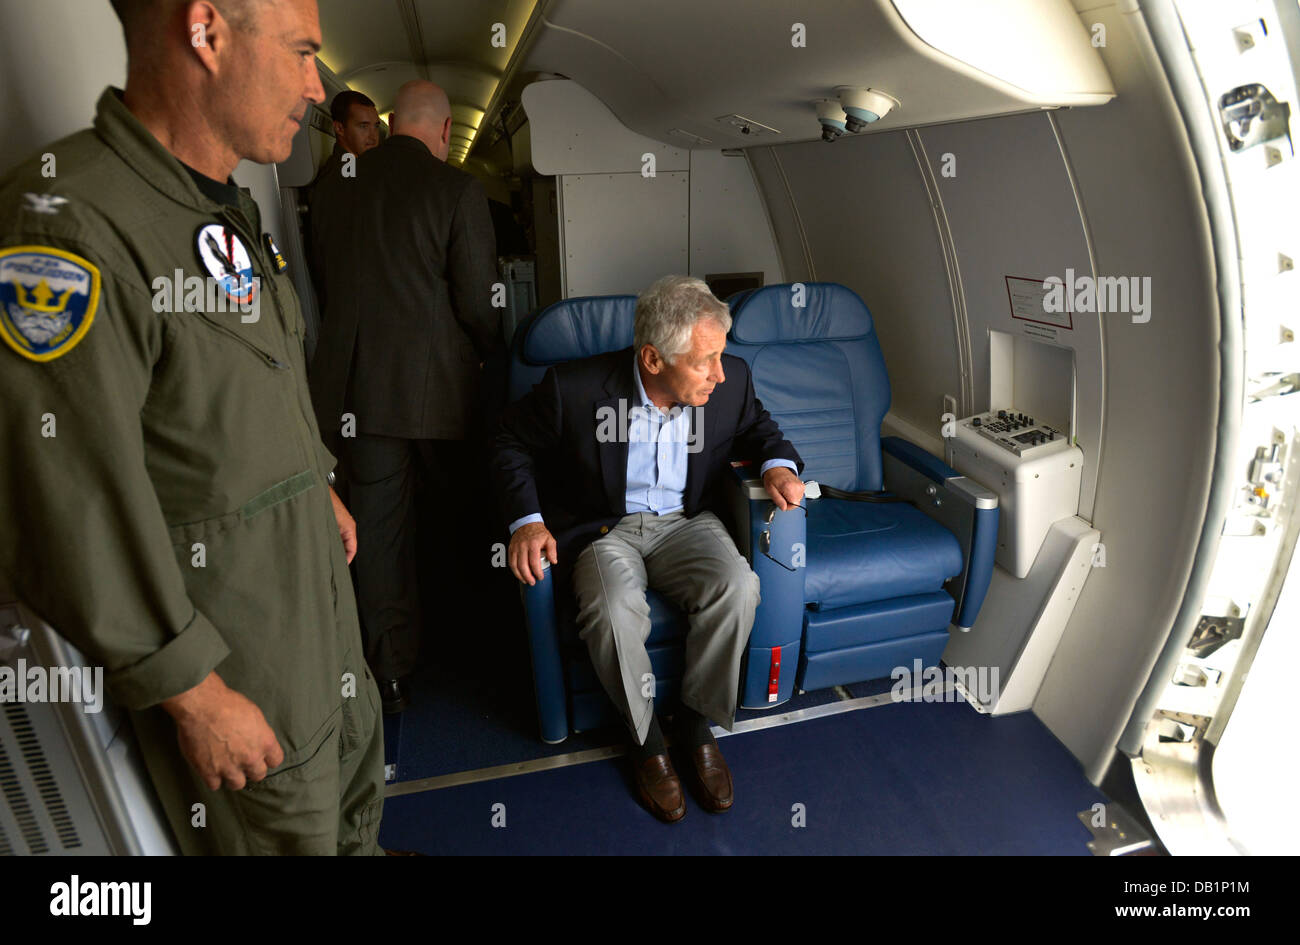 Secretary of Defense Chuck Hagel takes his seat aboard a U.S. Navy P-8 Poseidon aircraft assigned to Patrol Squadron (VP) 30 before departing Naval Air Station Jacksonville, Fla., July 16, 2013. Hagel was on a three-day trip to visit several installations Stock Photo